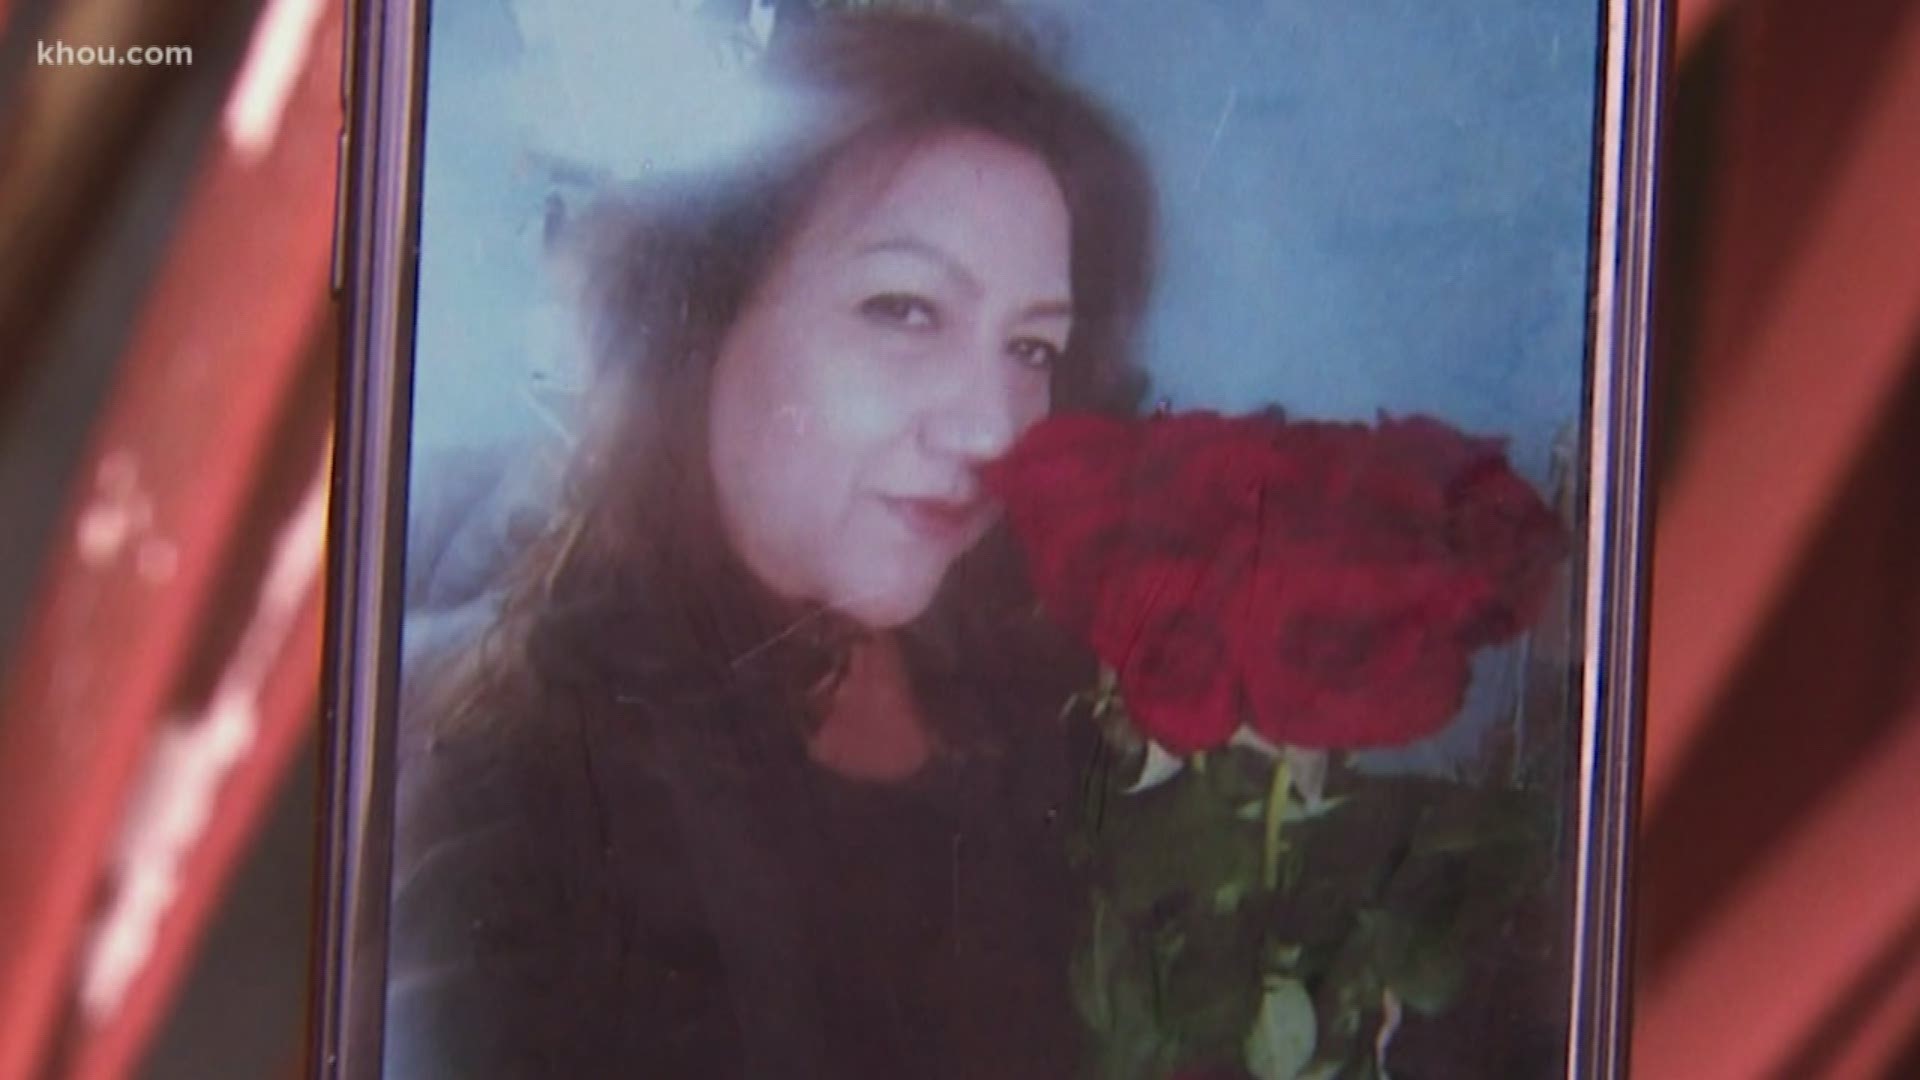 A family in east Houston is devastated after a someone shot and killed a beloved 52-year-old grandmother in her own driveway. The shooter is still out there.